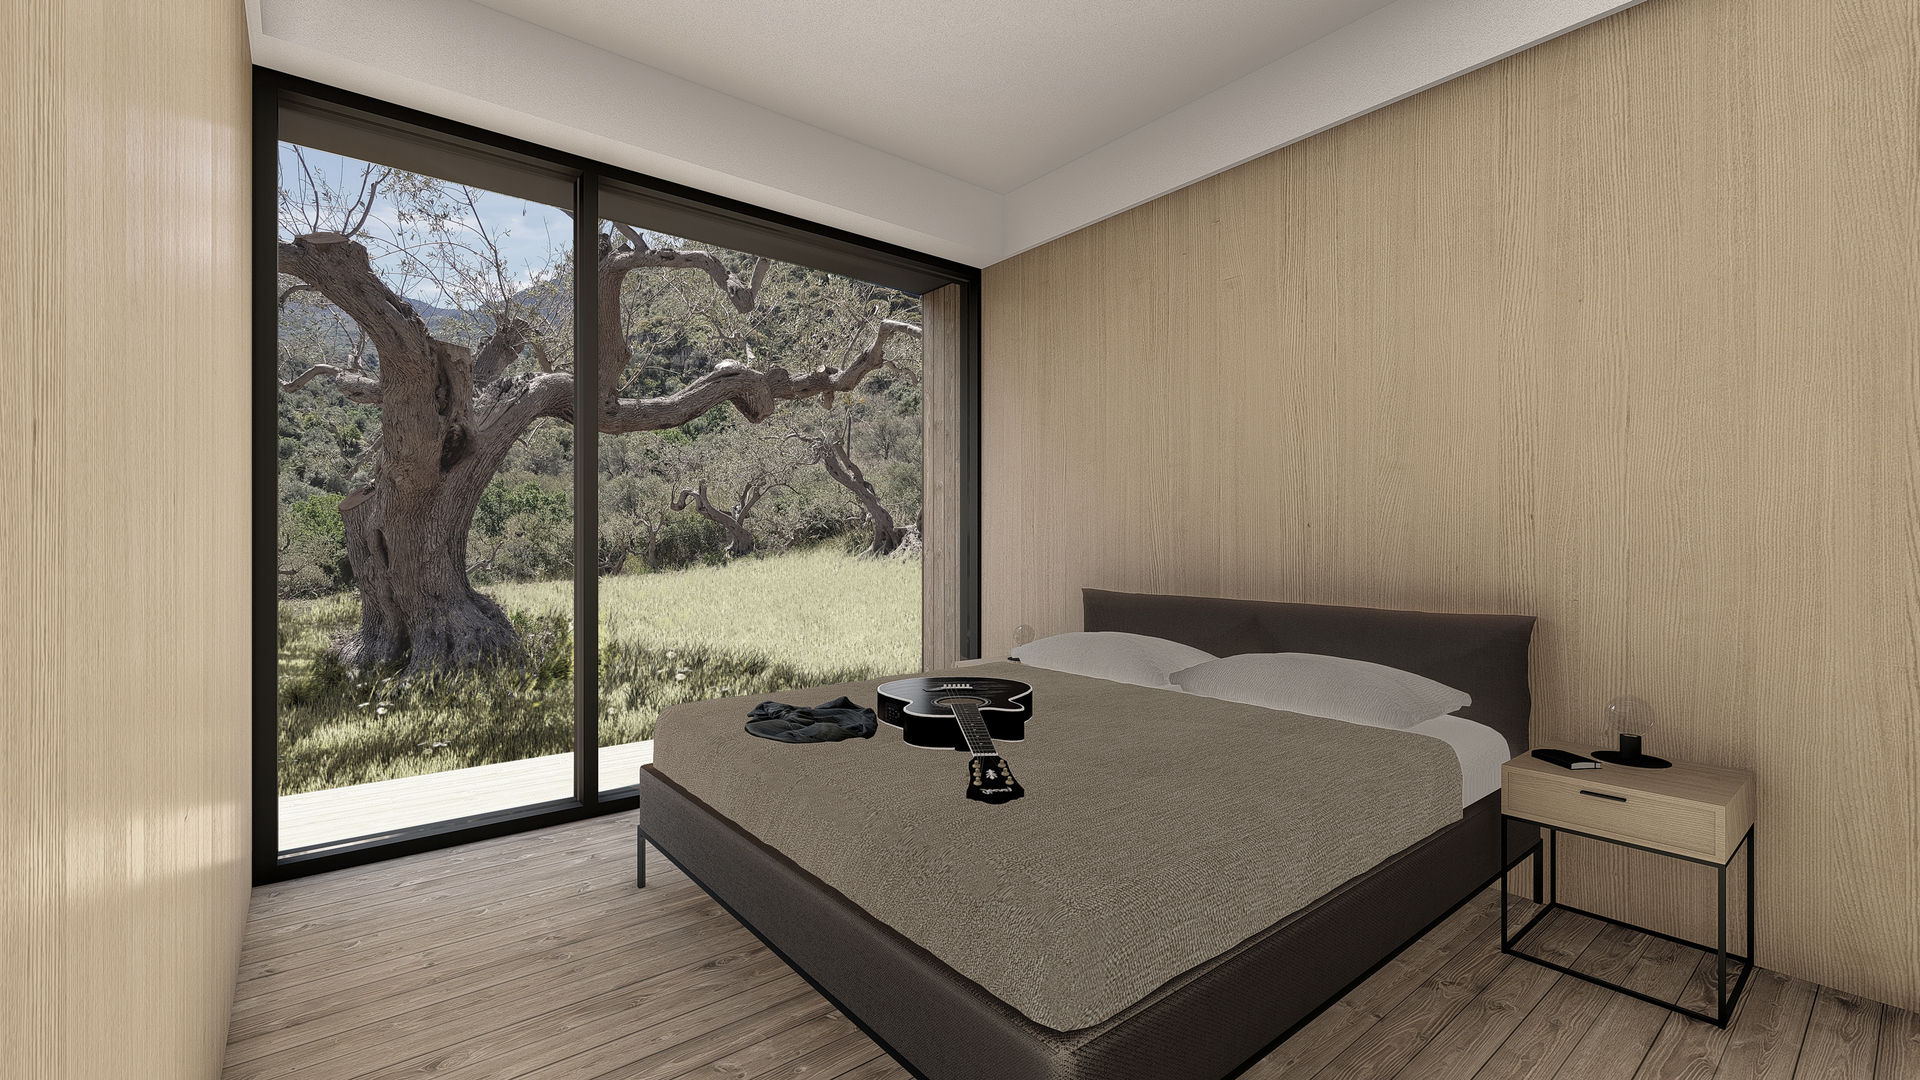 WOODEN HOUSE G|C – SICILY, ALESSIO LO BELLO ARCHITETTO a Palermo ALESSIO LO BELLO ARCHITETTO a Palermo غرفة نوم خشب Wood effect king-size bedroom, glass window, room with a view, queen-size bed, double room